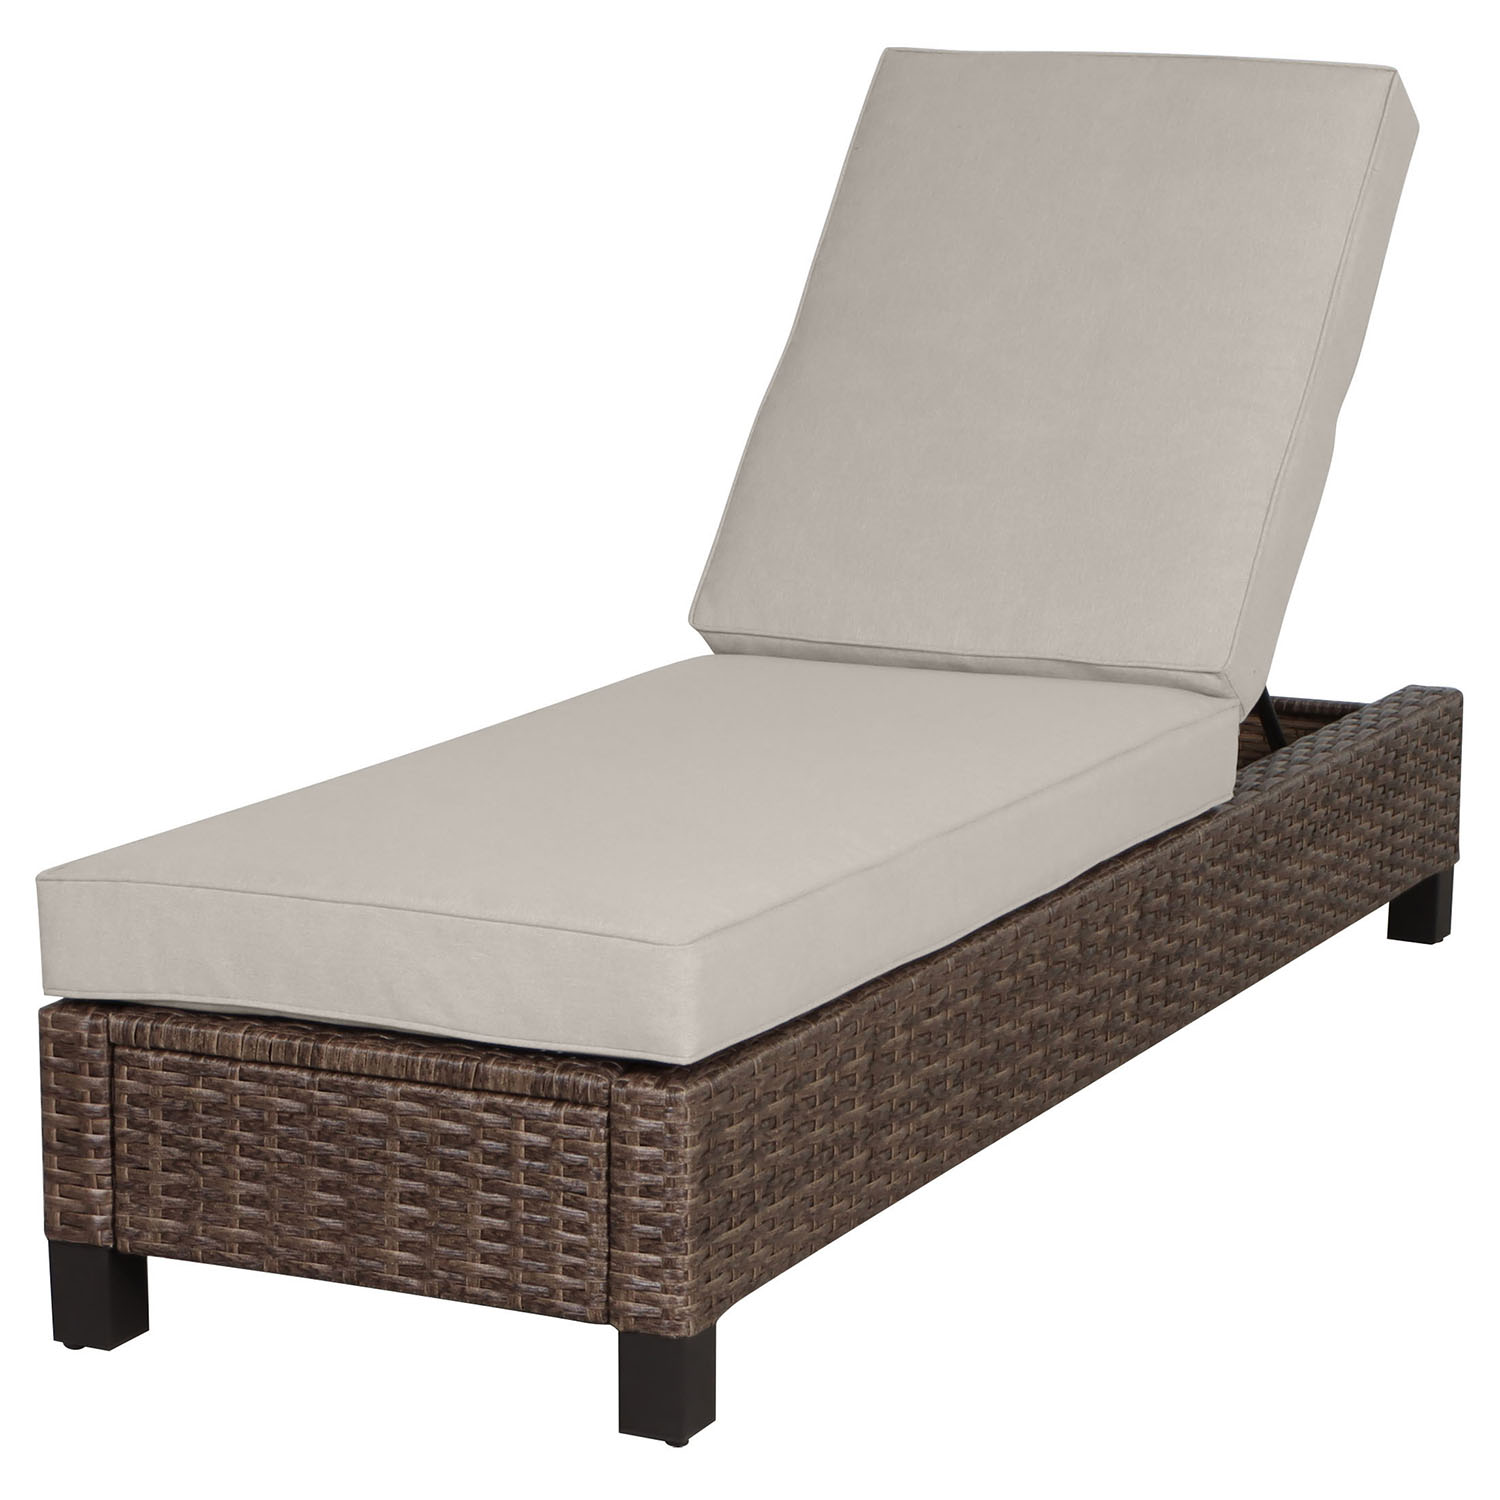 Better Homes & Gardens Brookbury Single Outdoor Chaise Lounge Chair- Beige - image 2 of 5